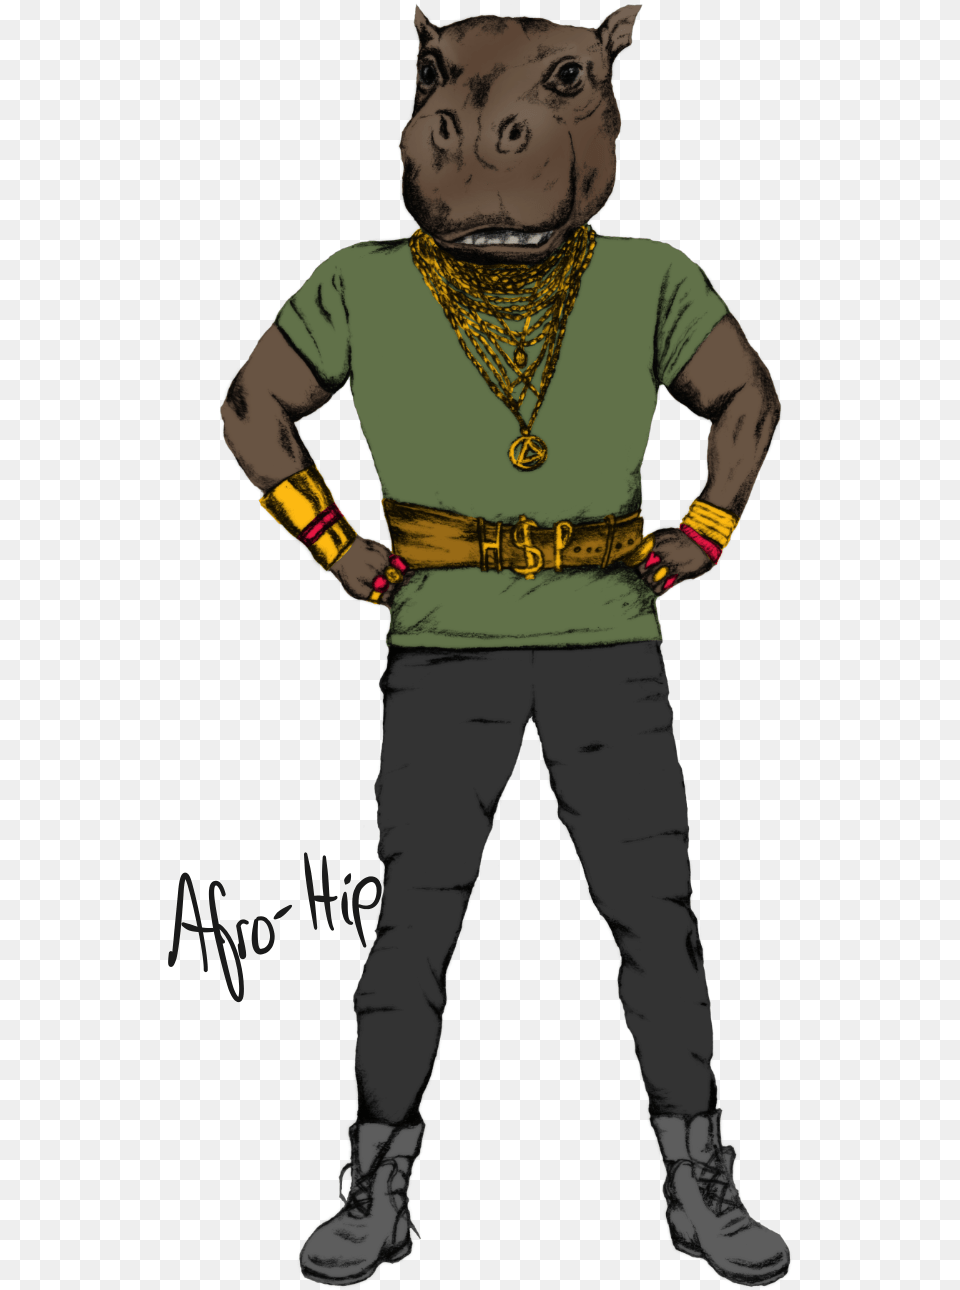 Afro Hip Afroip Cartoon, Accessories, Adult, Clothing, Costume Png Image